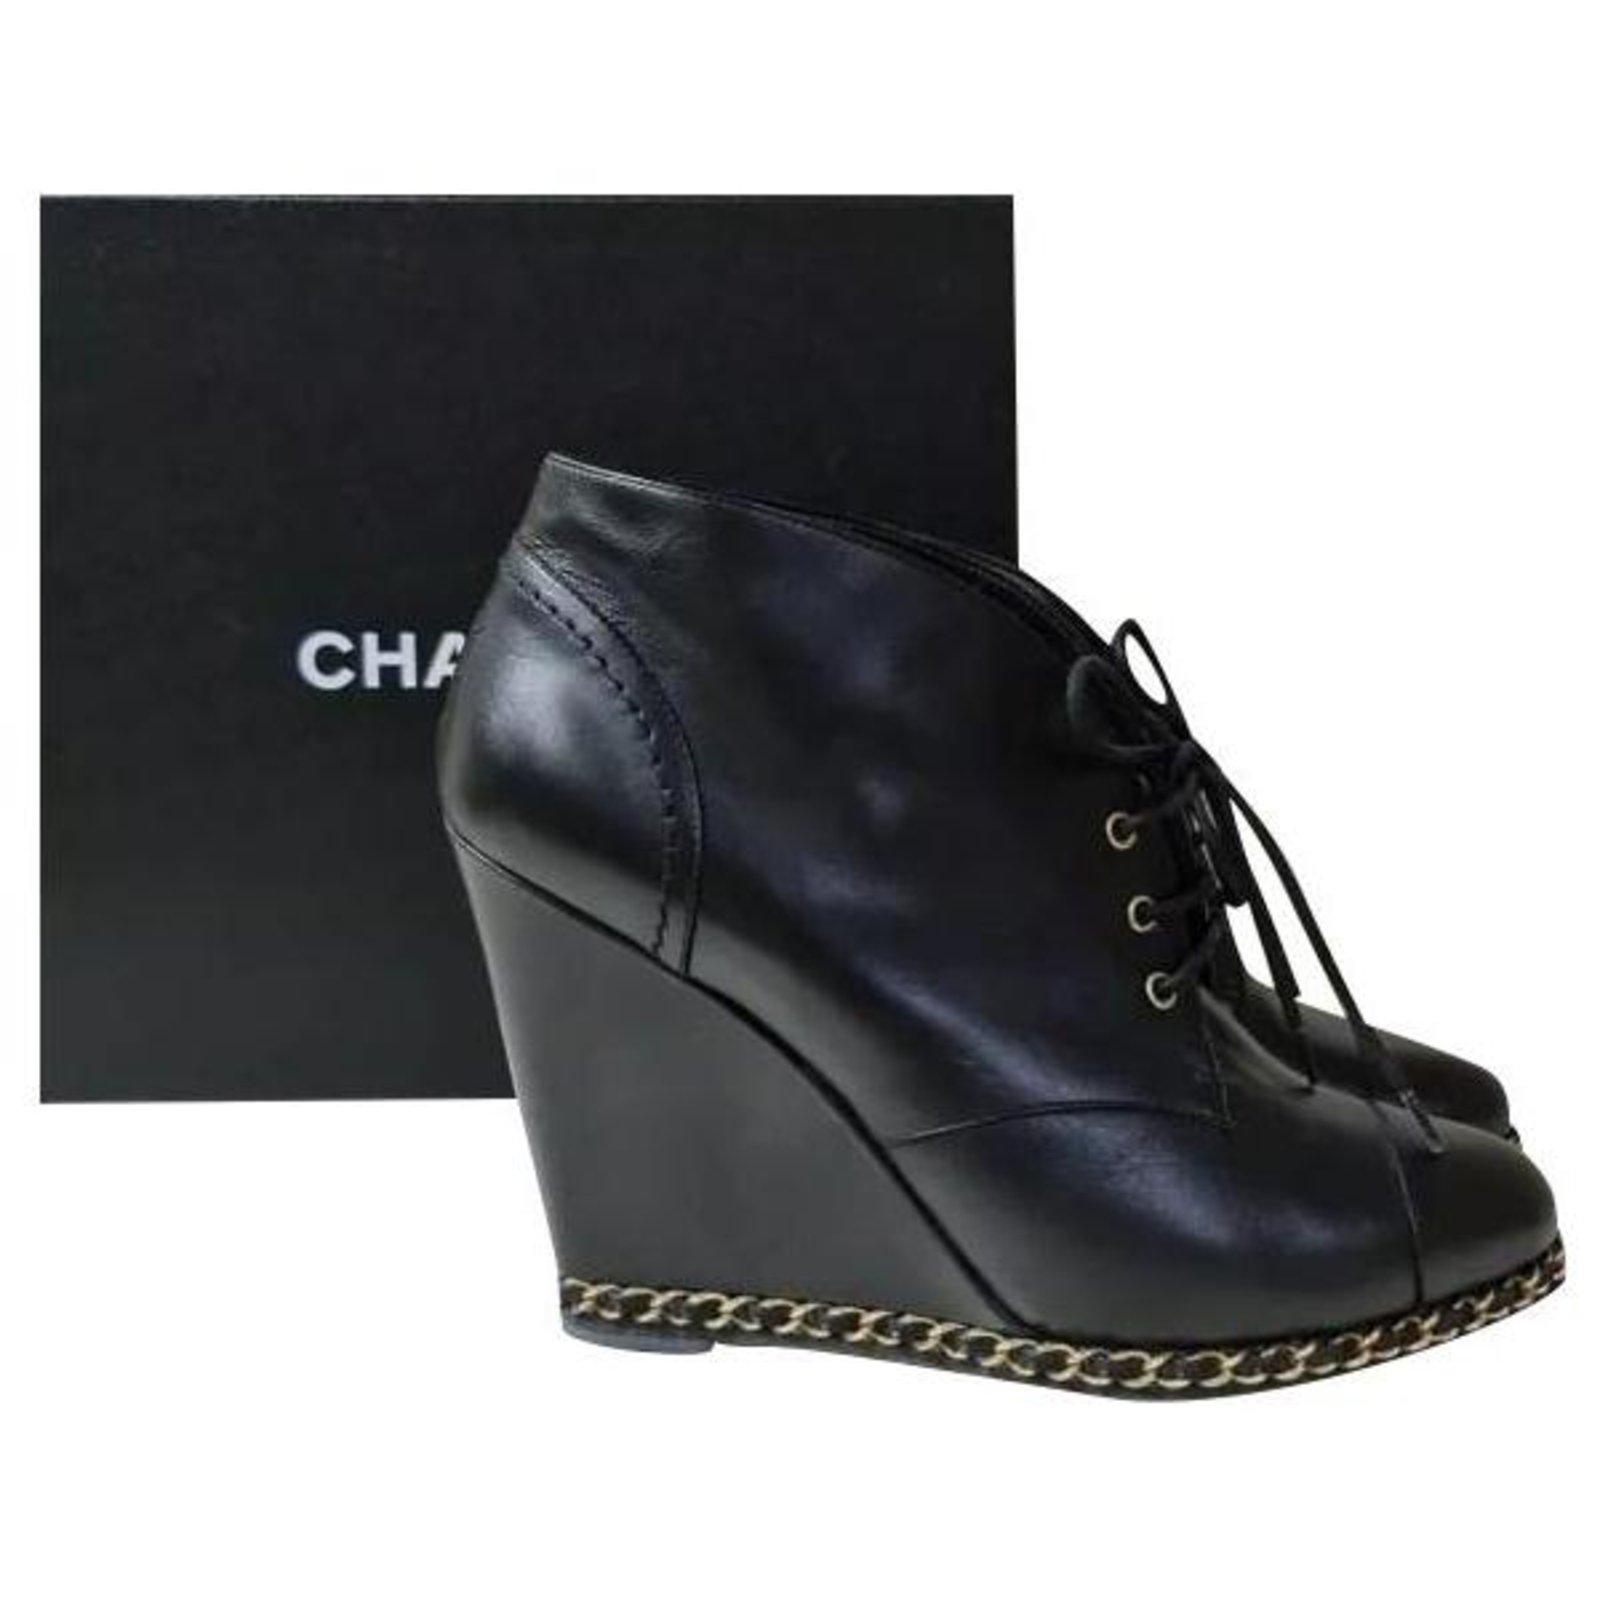 Chanel Black Leather Chain Lace Up Wedges Booties Sz.40